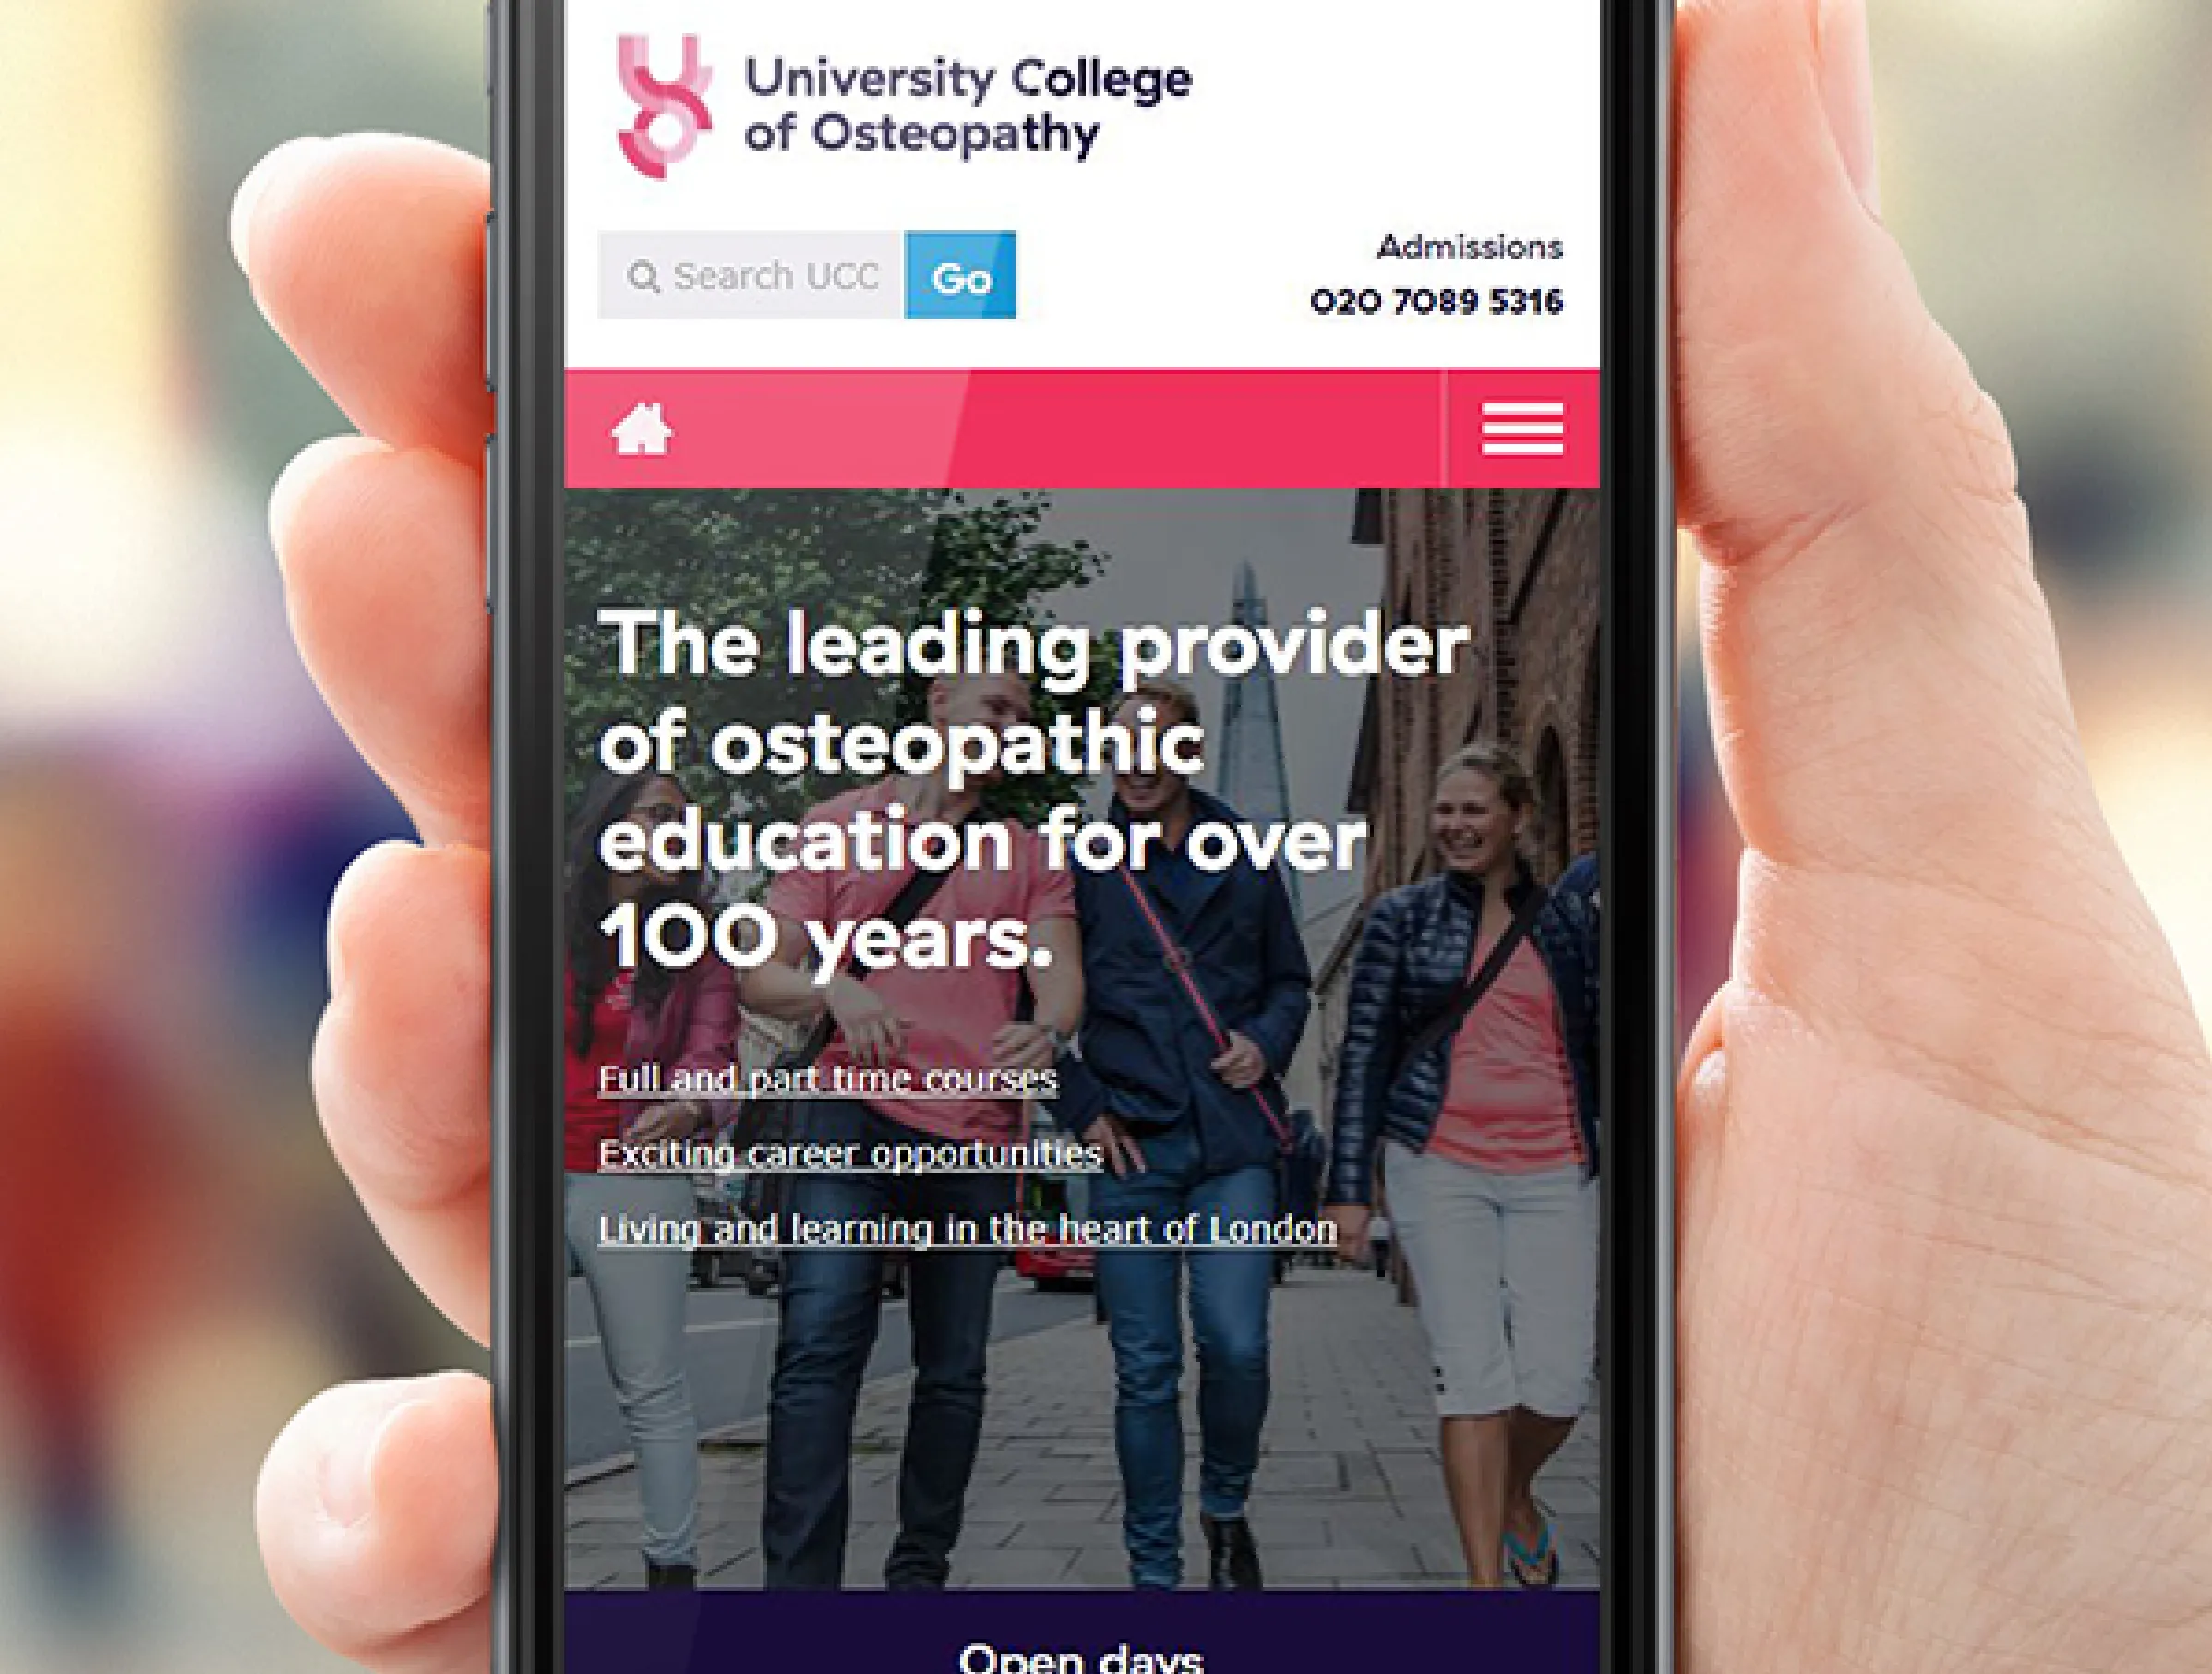 UCO homepage shown on mobile phone screen, held in a hand